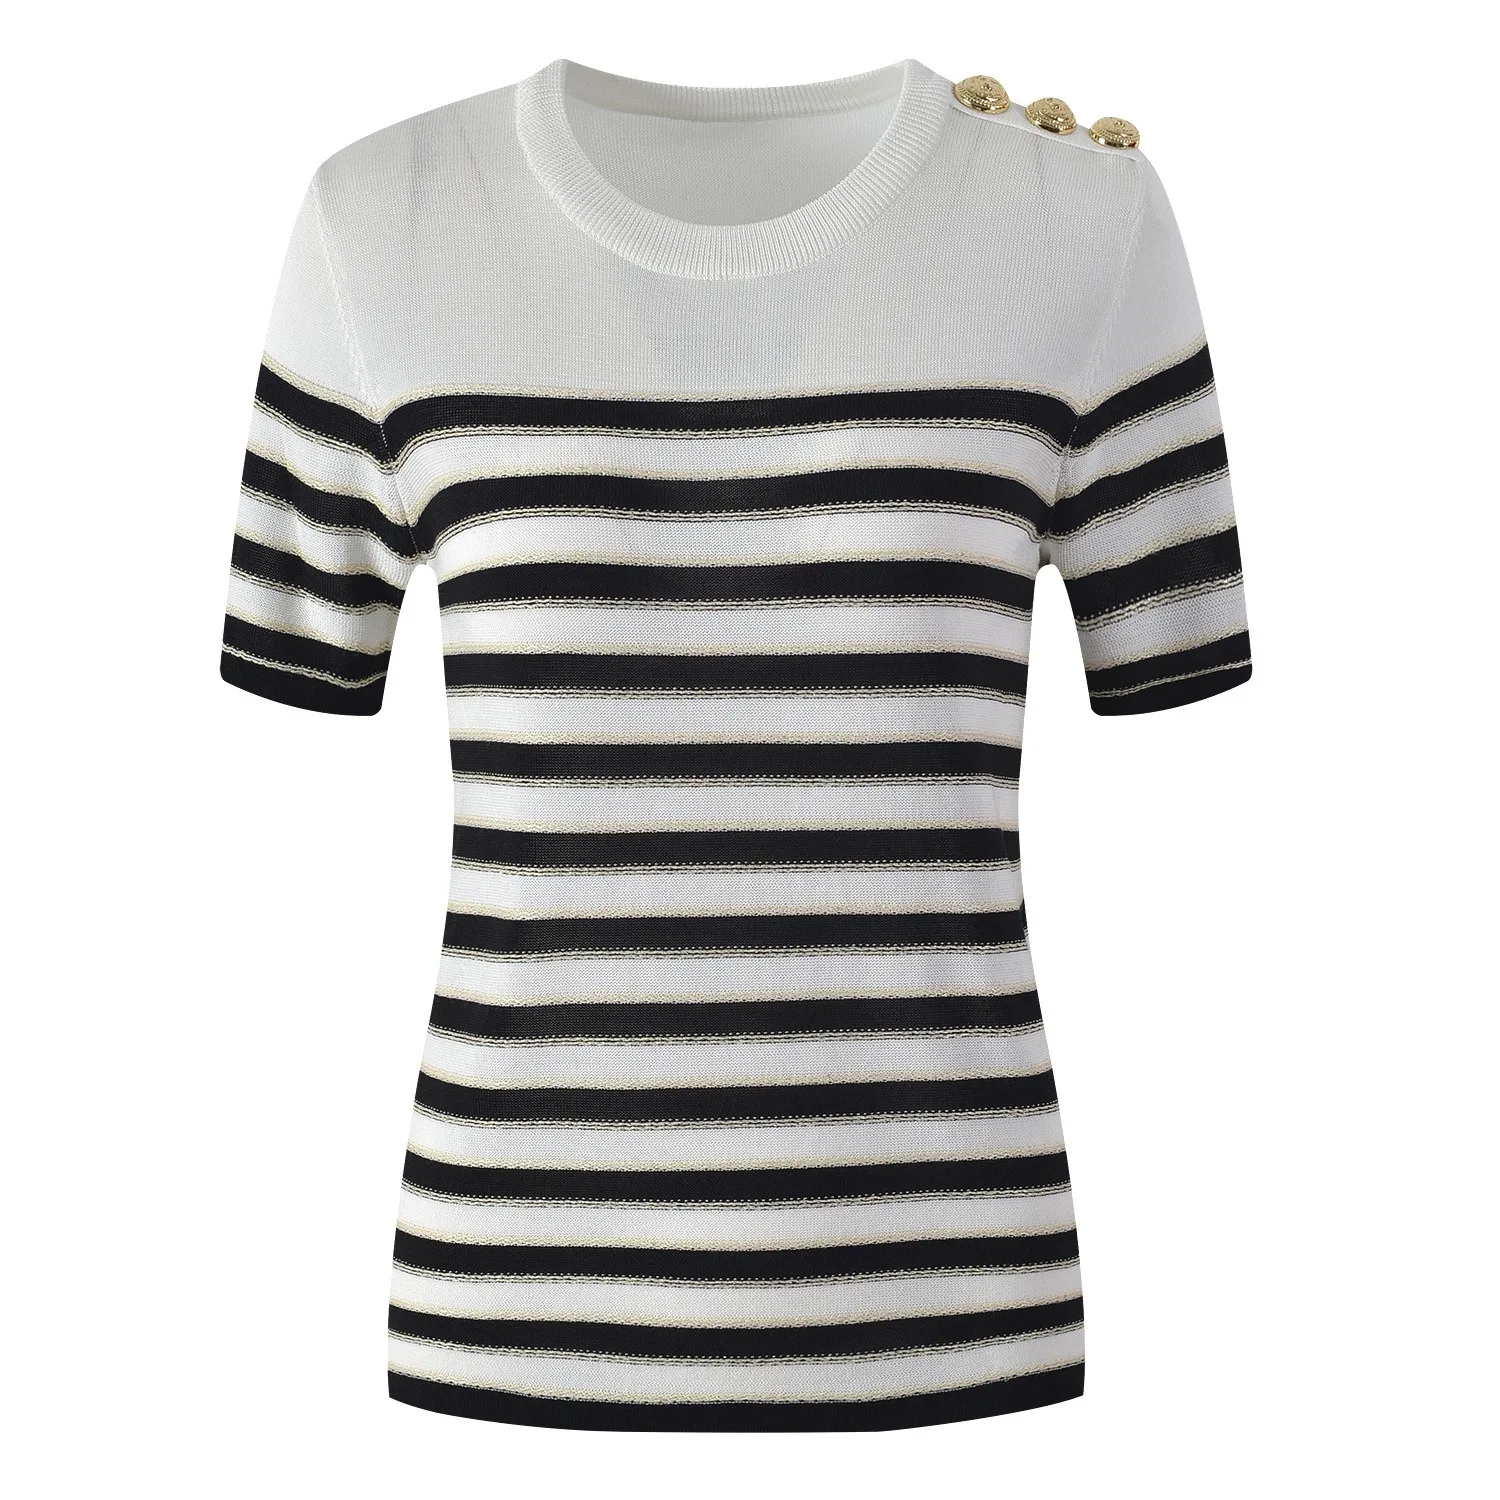 French-Stylish-O-neck-Casual-Short-Sleeve-Striped-Gold-Thread-Knitted-Sweater-Skinny-2PCS-Skirt-Sets-1